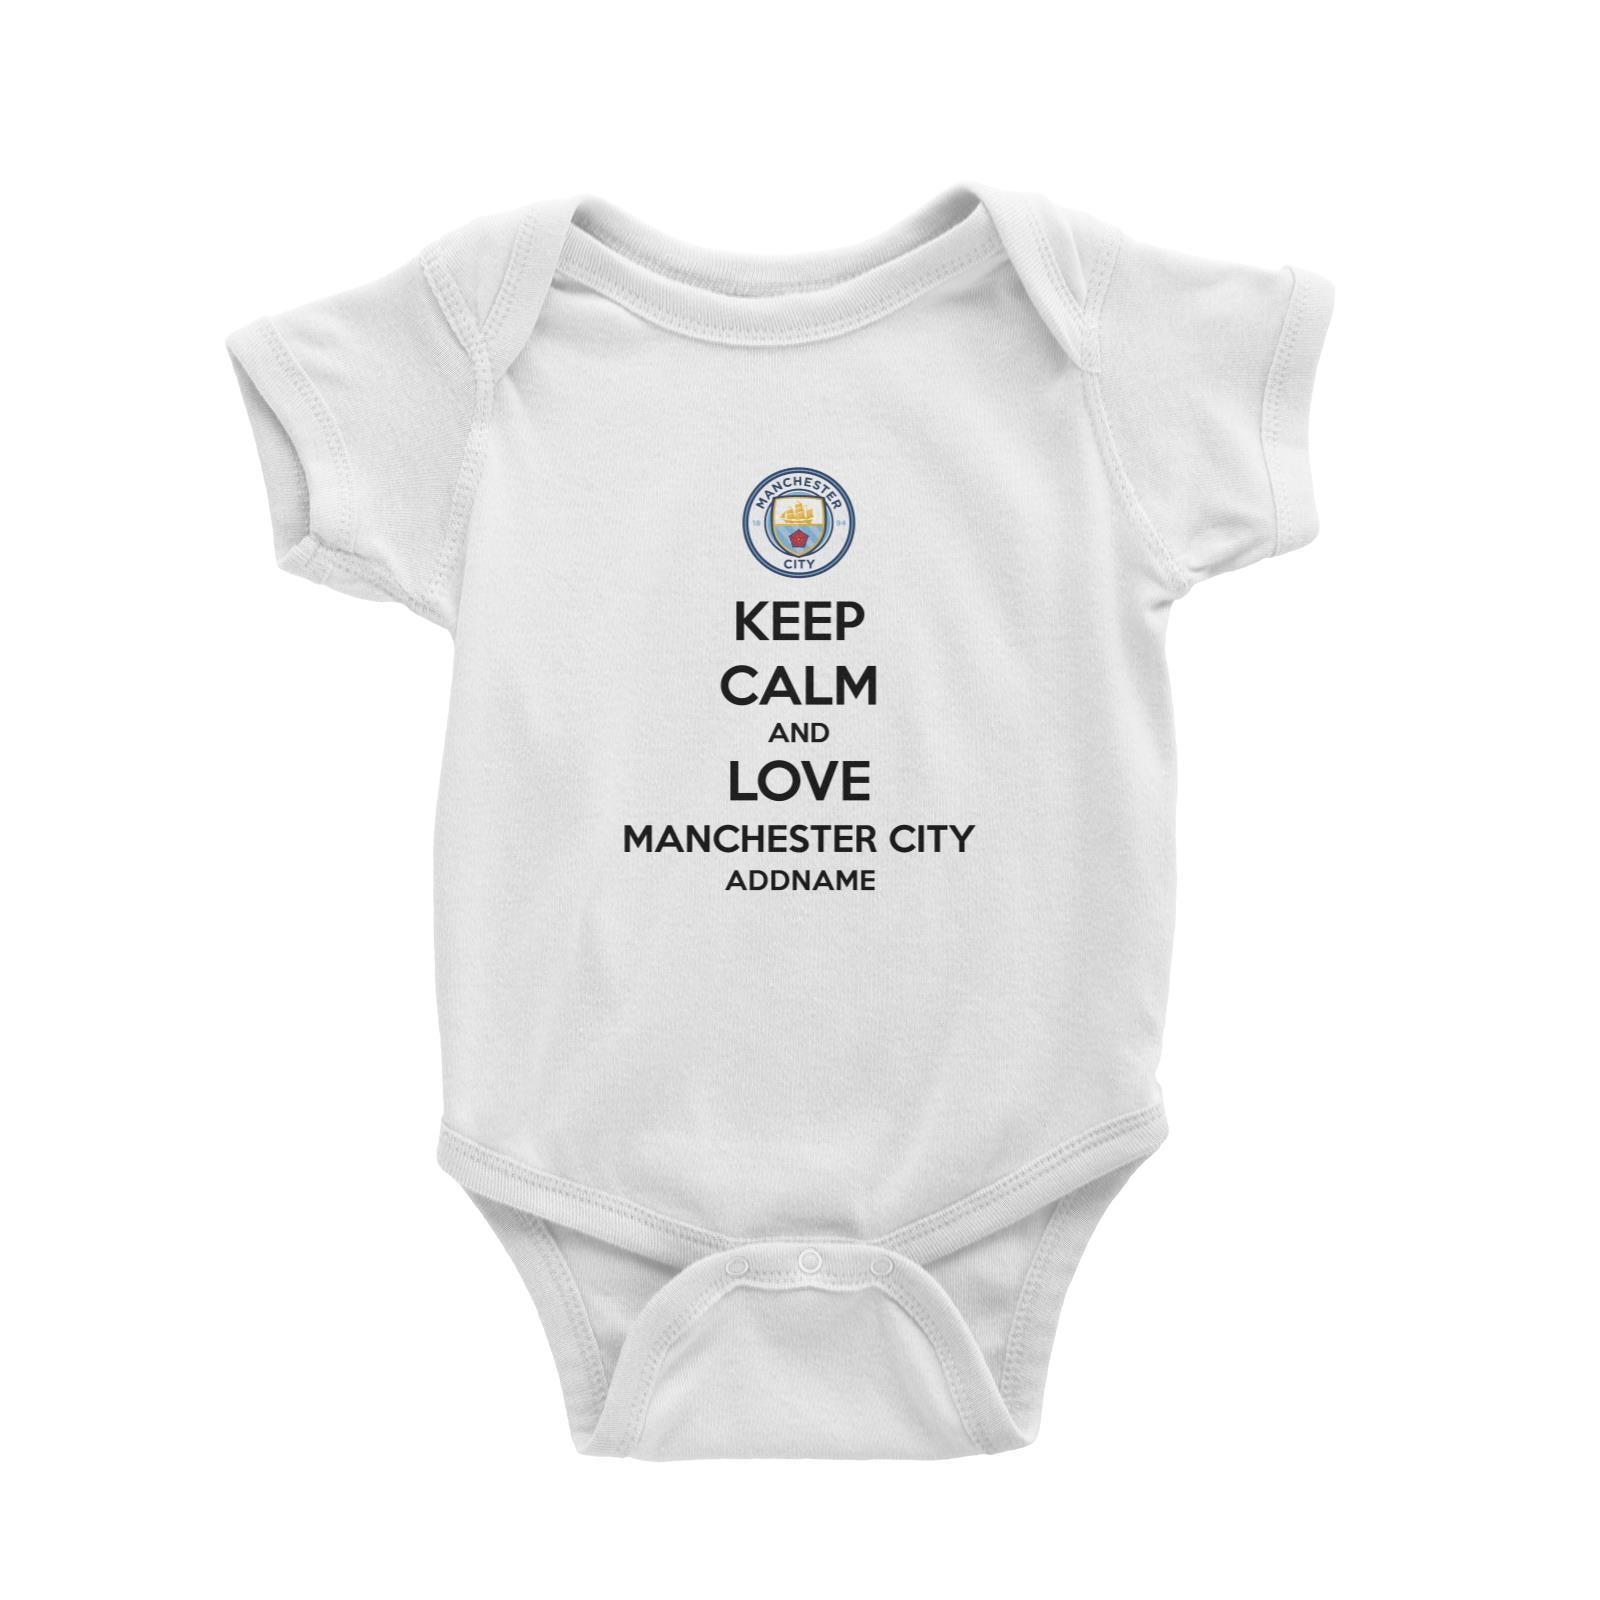 Manchester City Football Keep Calm And Love Series Addname Baby Romper